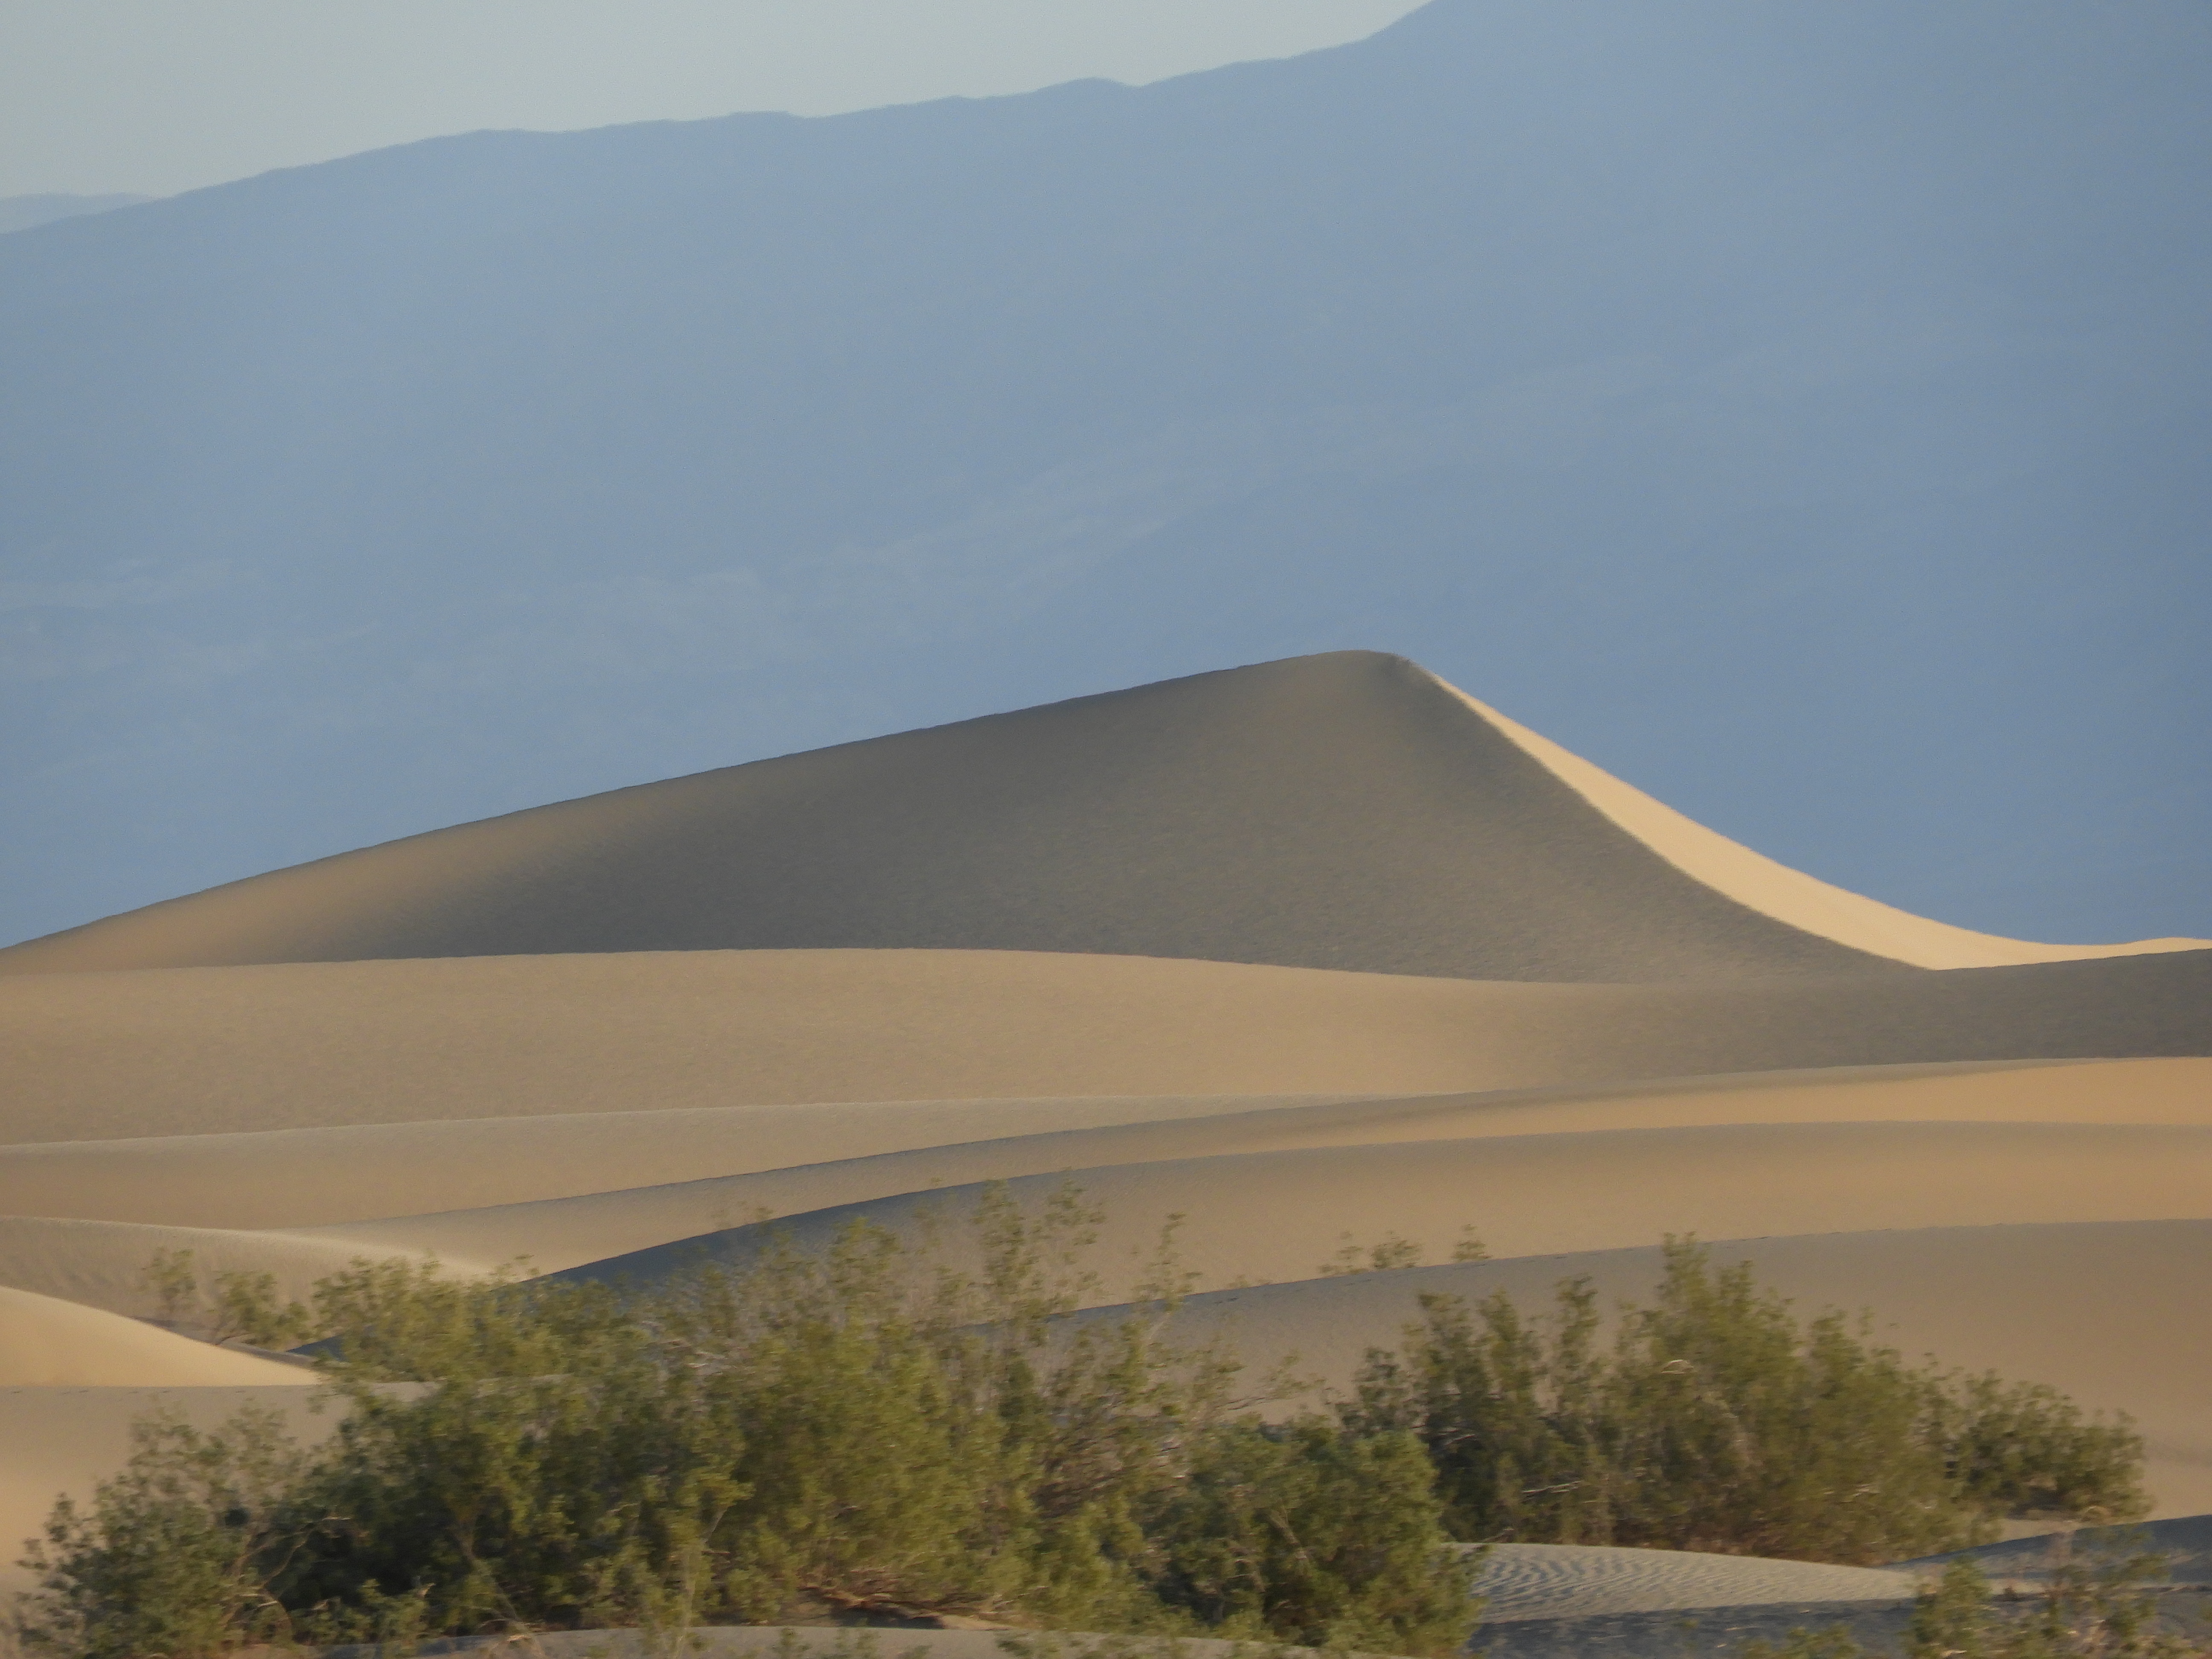 Mesquite Sand Dunes in Death Valley National Park in southeastern California